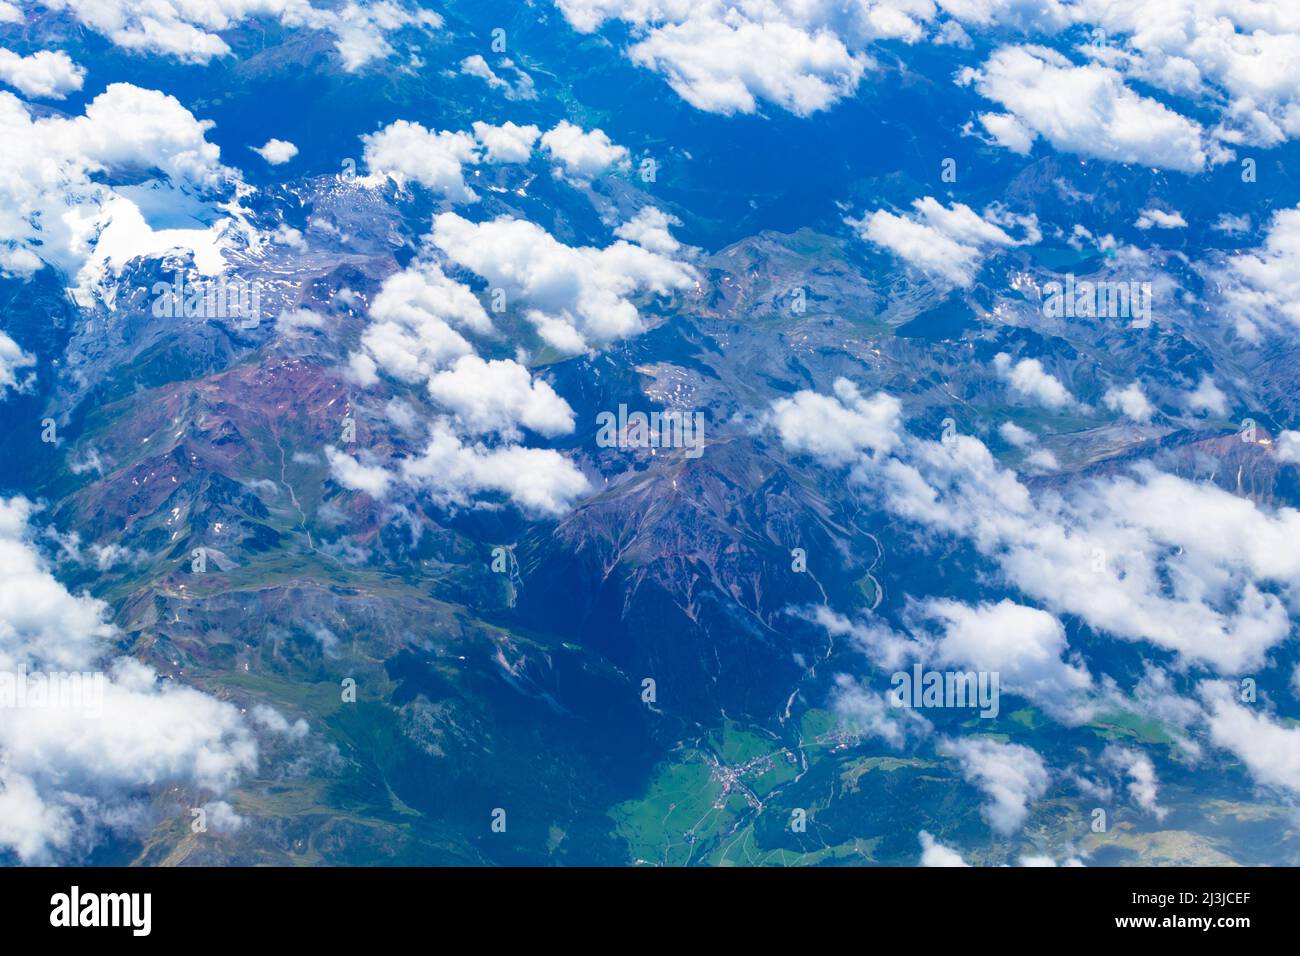 Aerial view of Alps mountains with Reschensee -Lago di Rèsia -Reschensee or Lake Reschen is an artificial lake in the western portion of South Tyrol, Stock Photo